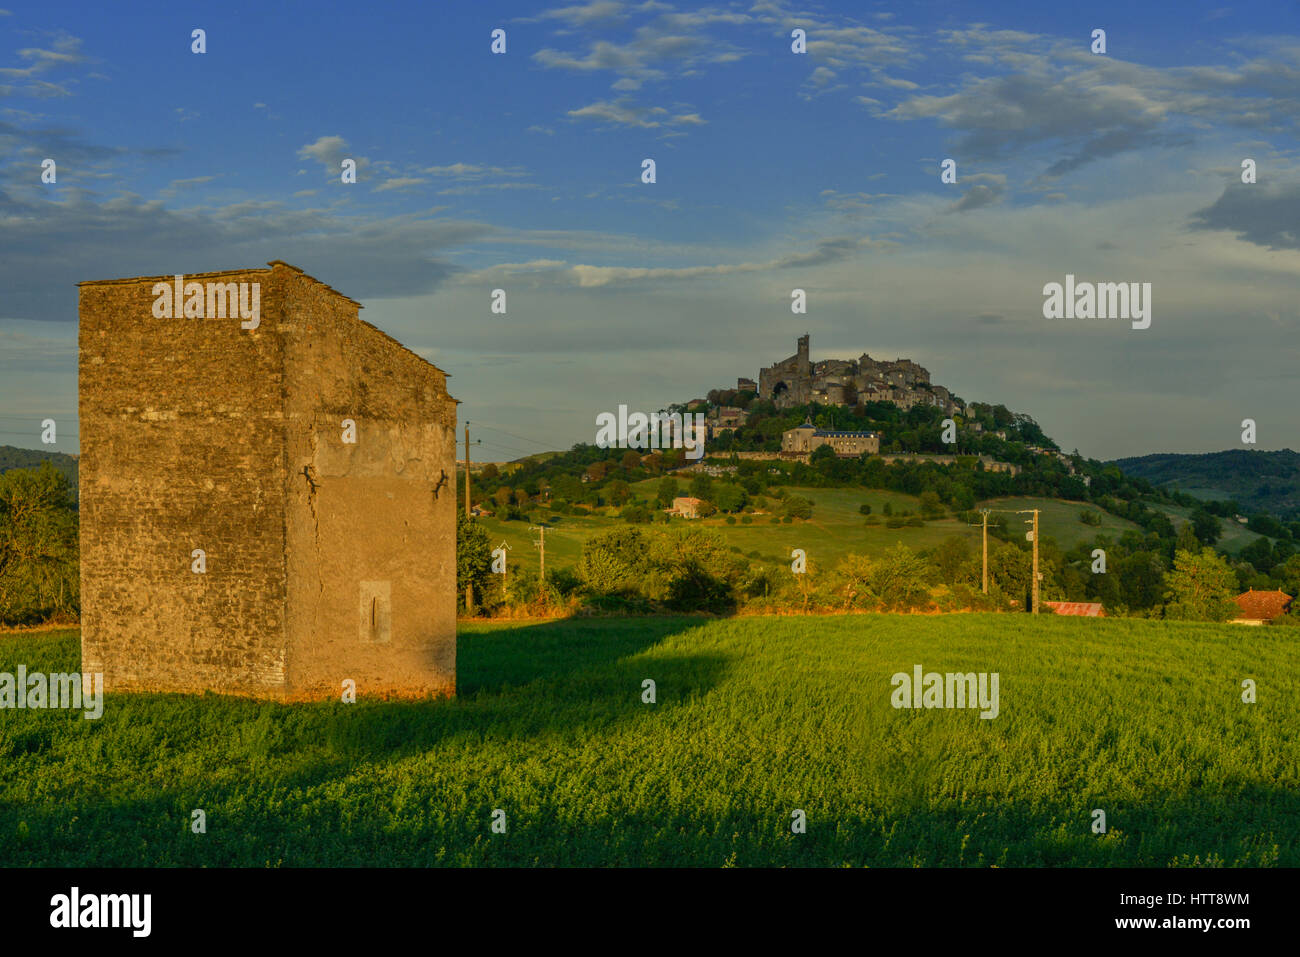 Pigeonnier in a field overlooking the medieval village of Cordes-sur-Ciel, in the Occitanie region of southern France Stock Photo